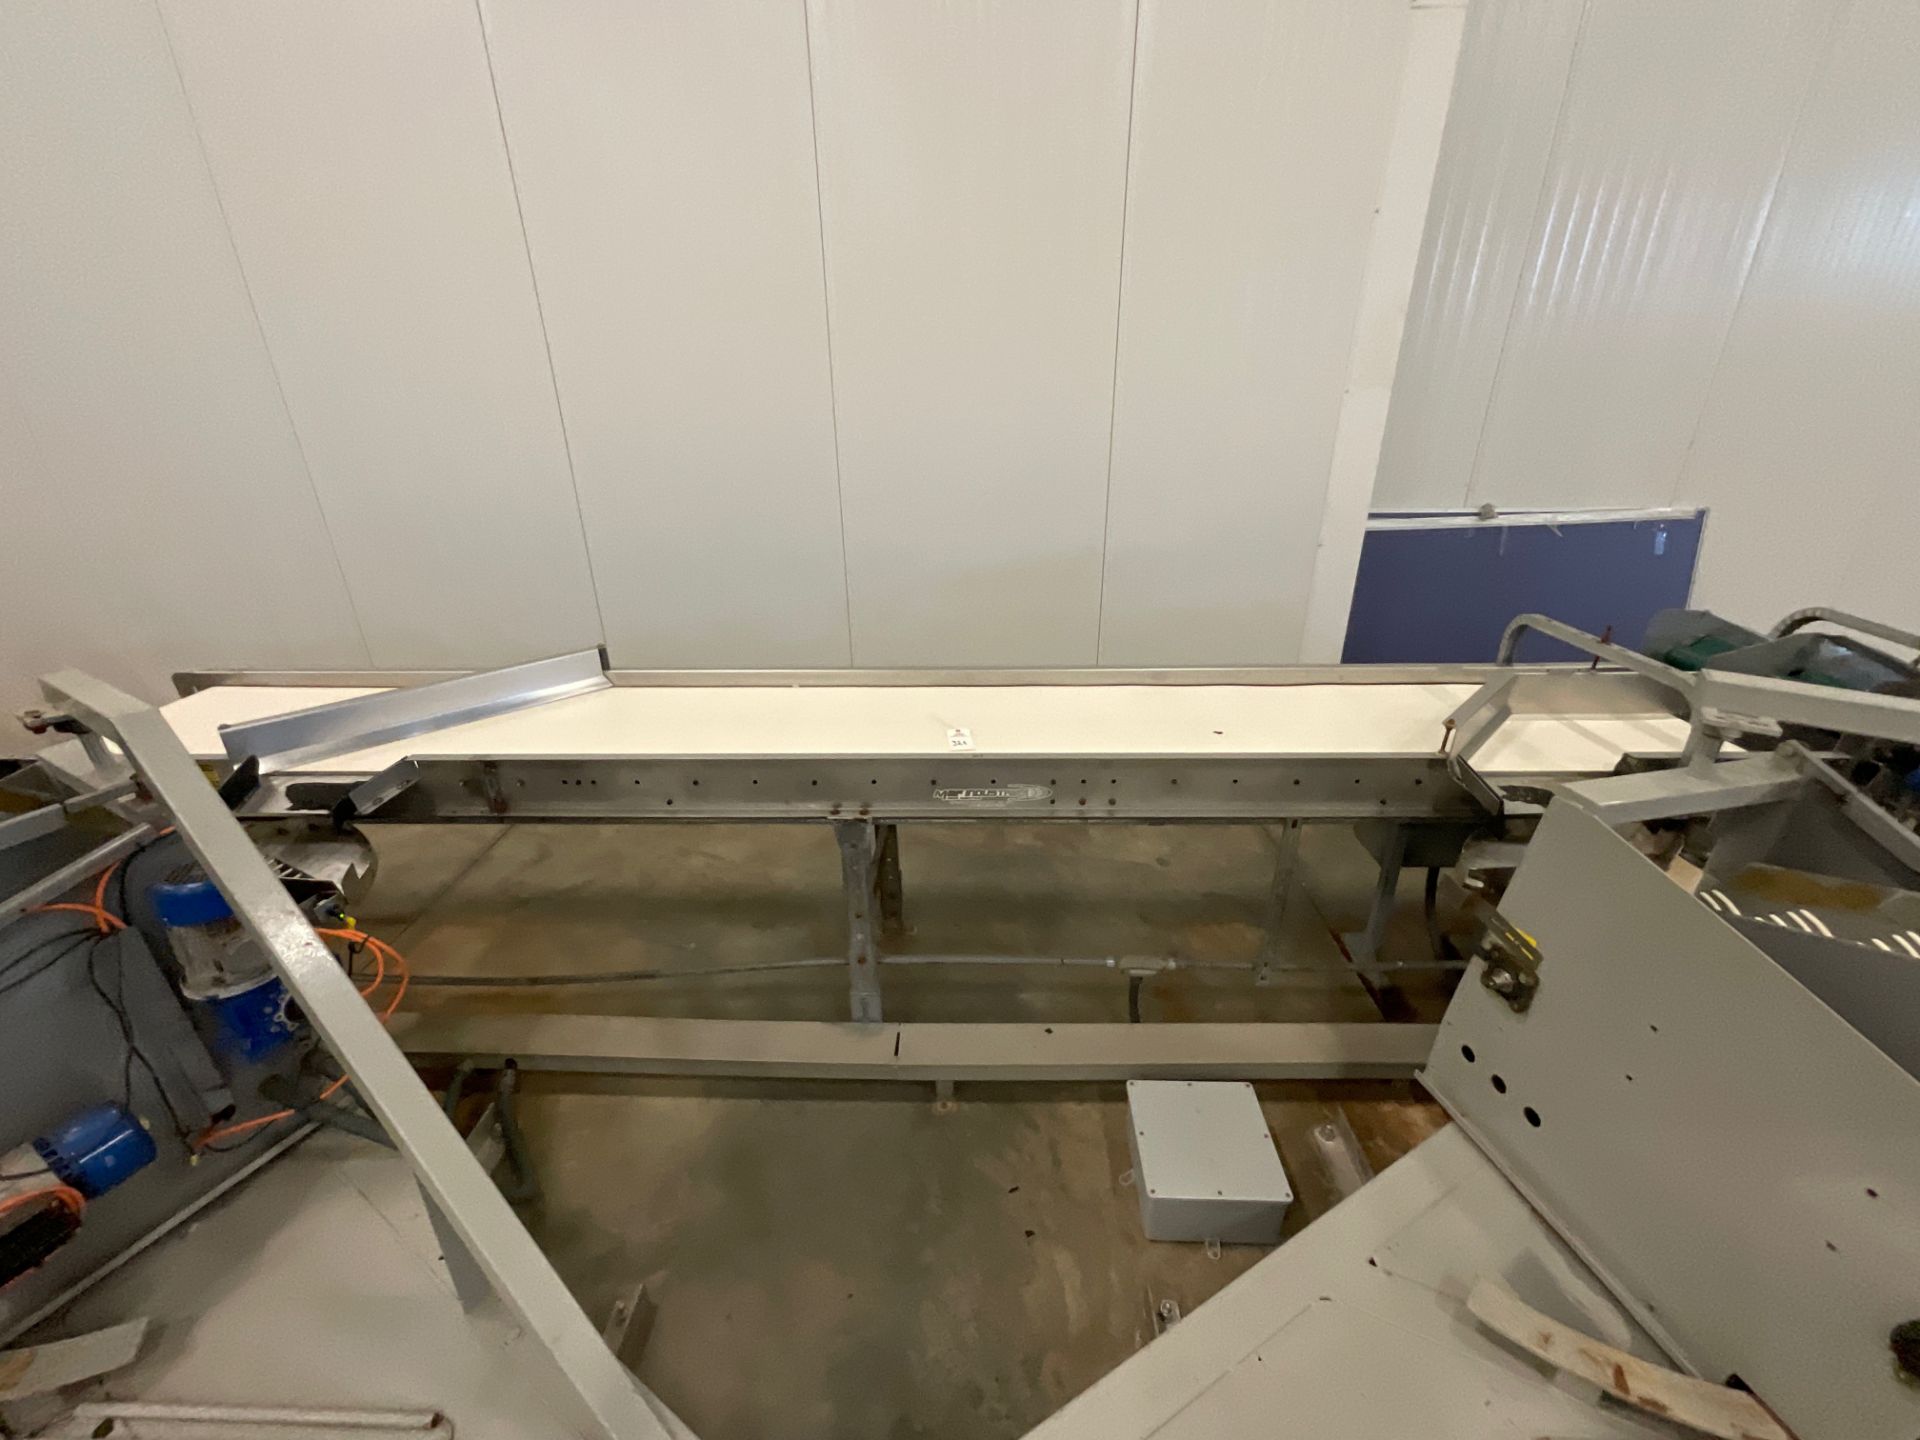 MAF Roda Powered Packoff Conveyor with Gated Drops, S/N: 1252-1570, A - Subj to Bulk | Rig Fee $200